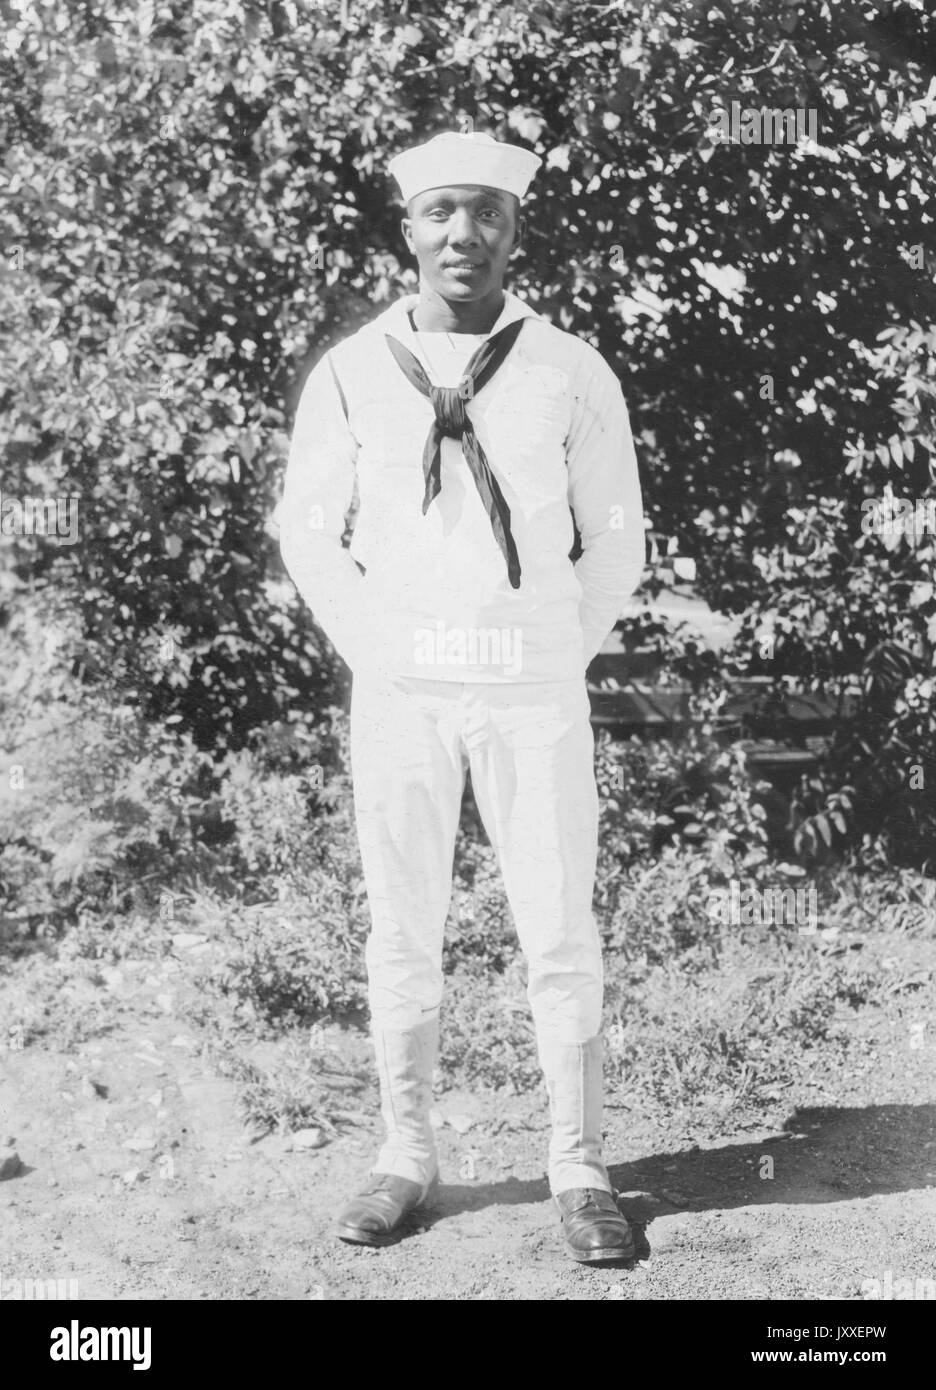 Portrait of an African American US Navy Sailor standing in front of shrubbery, is hands are tucked behind his back and he is wearing a light colored Sailor uniform, 1920. Stock Photo